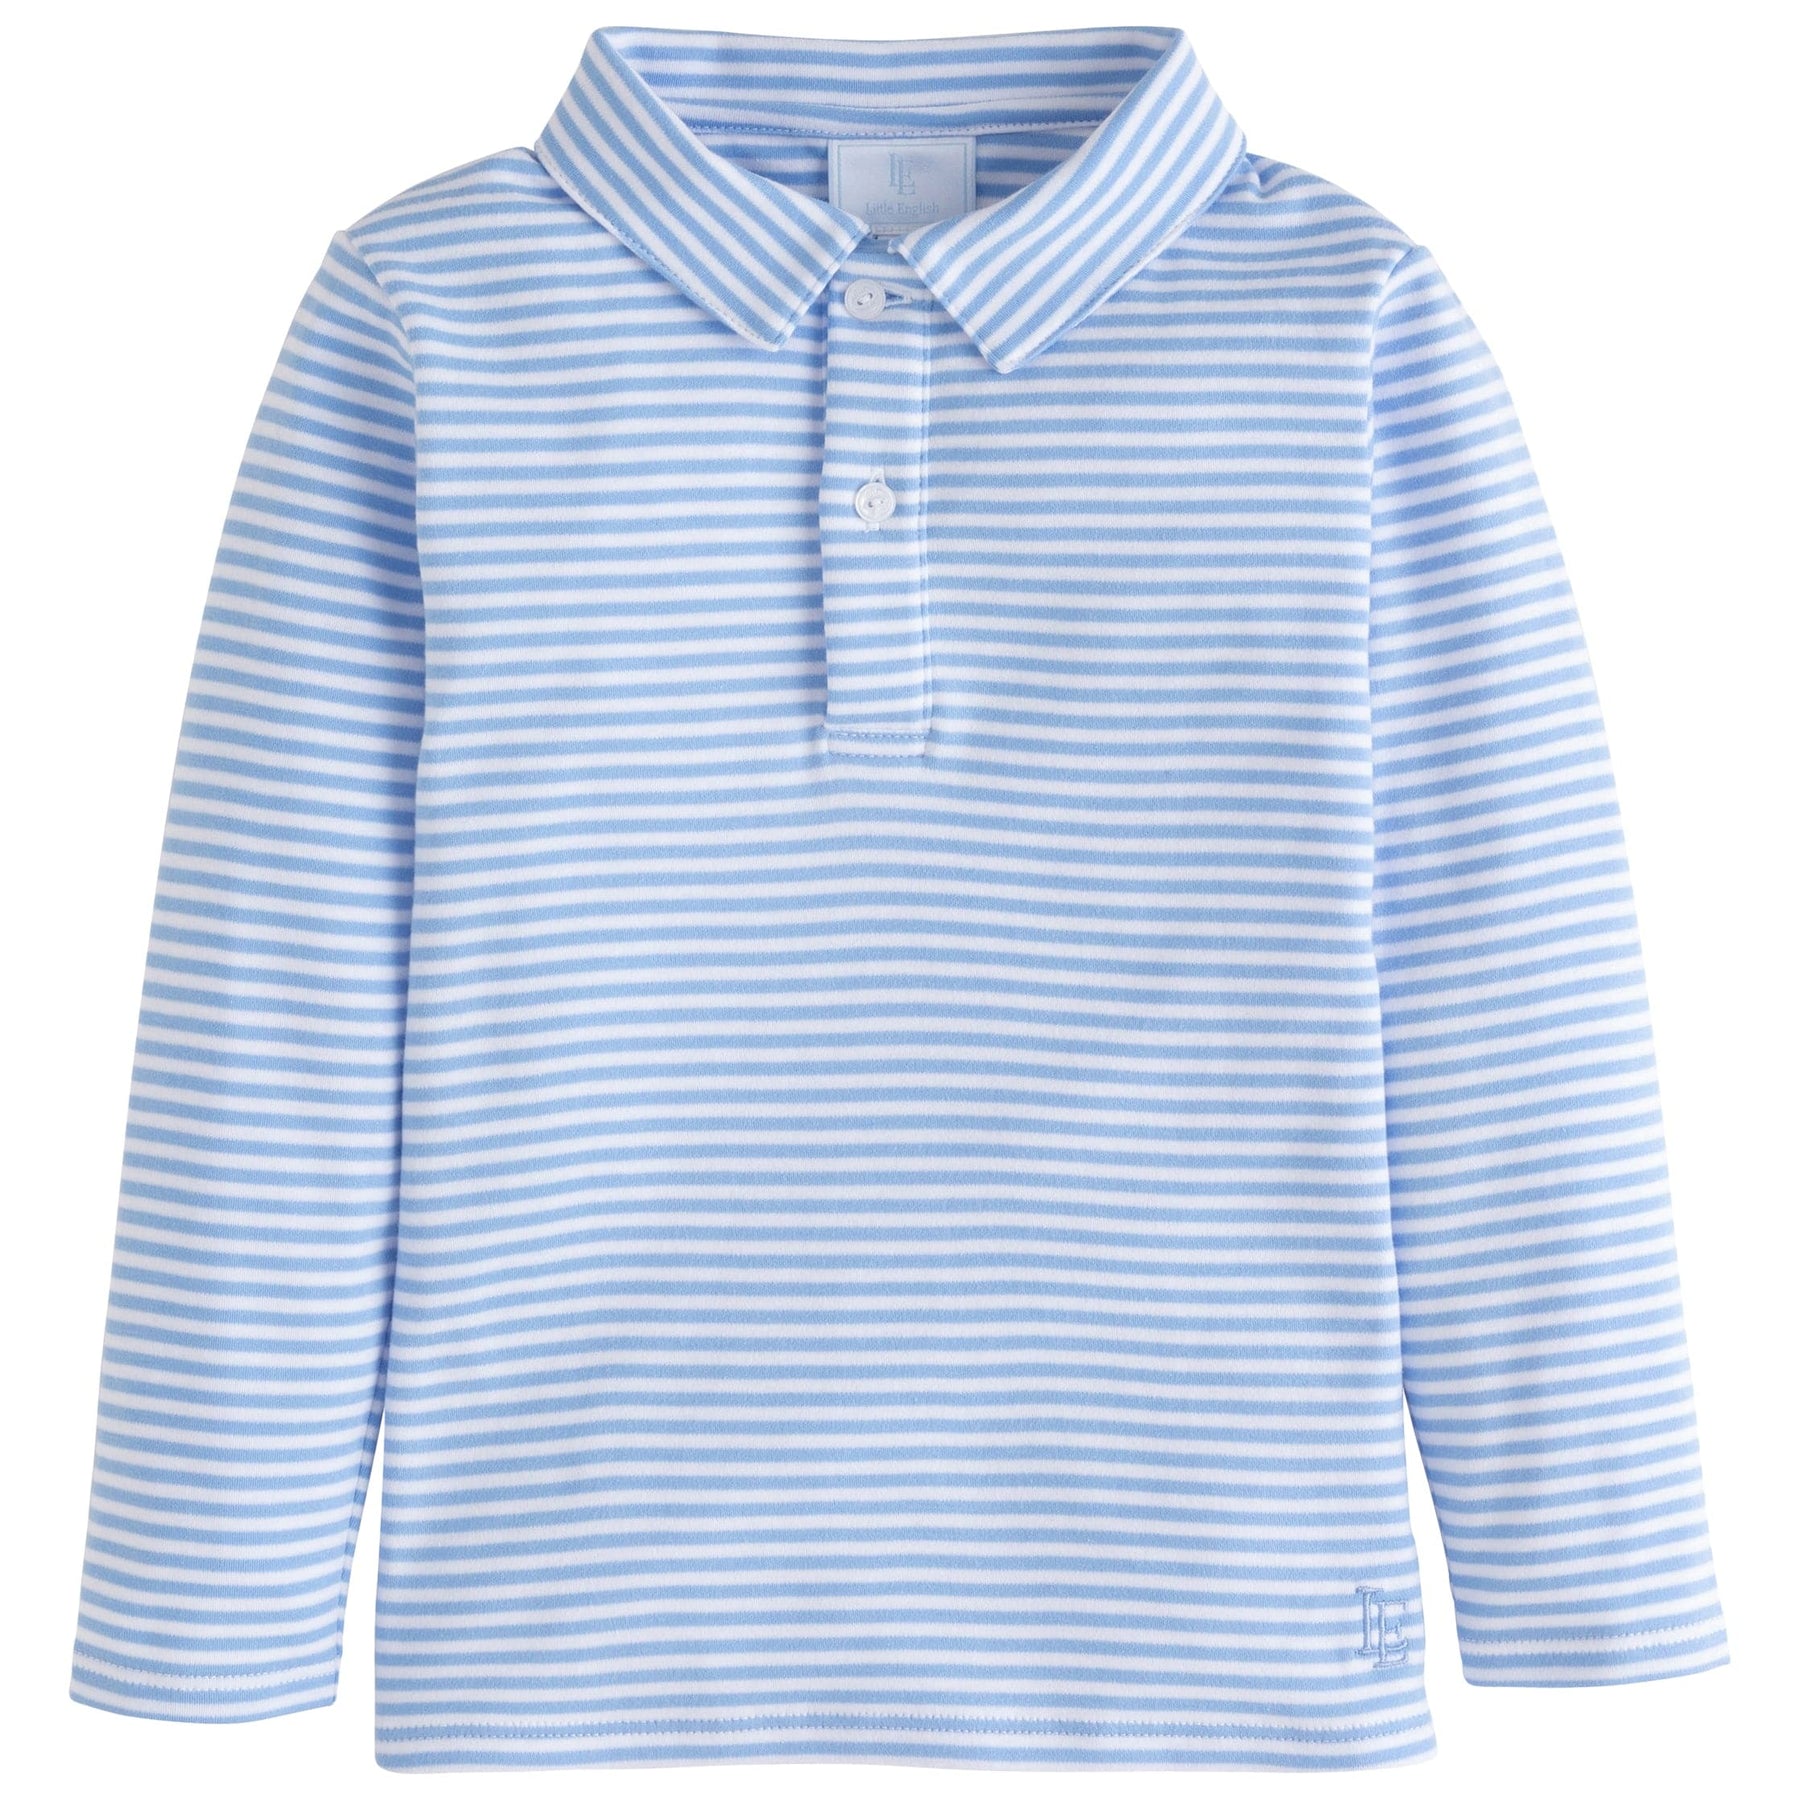 seguridadindustrialcr classic childrens clothing boys light blue and white striped long sleeve polo